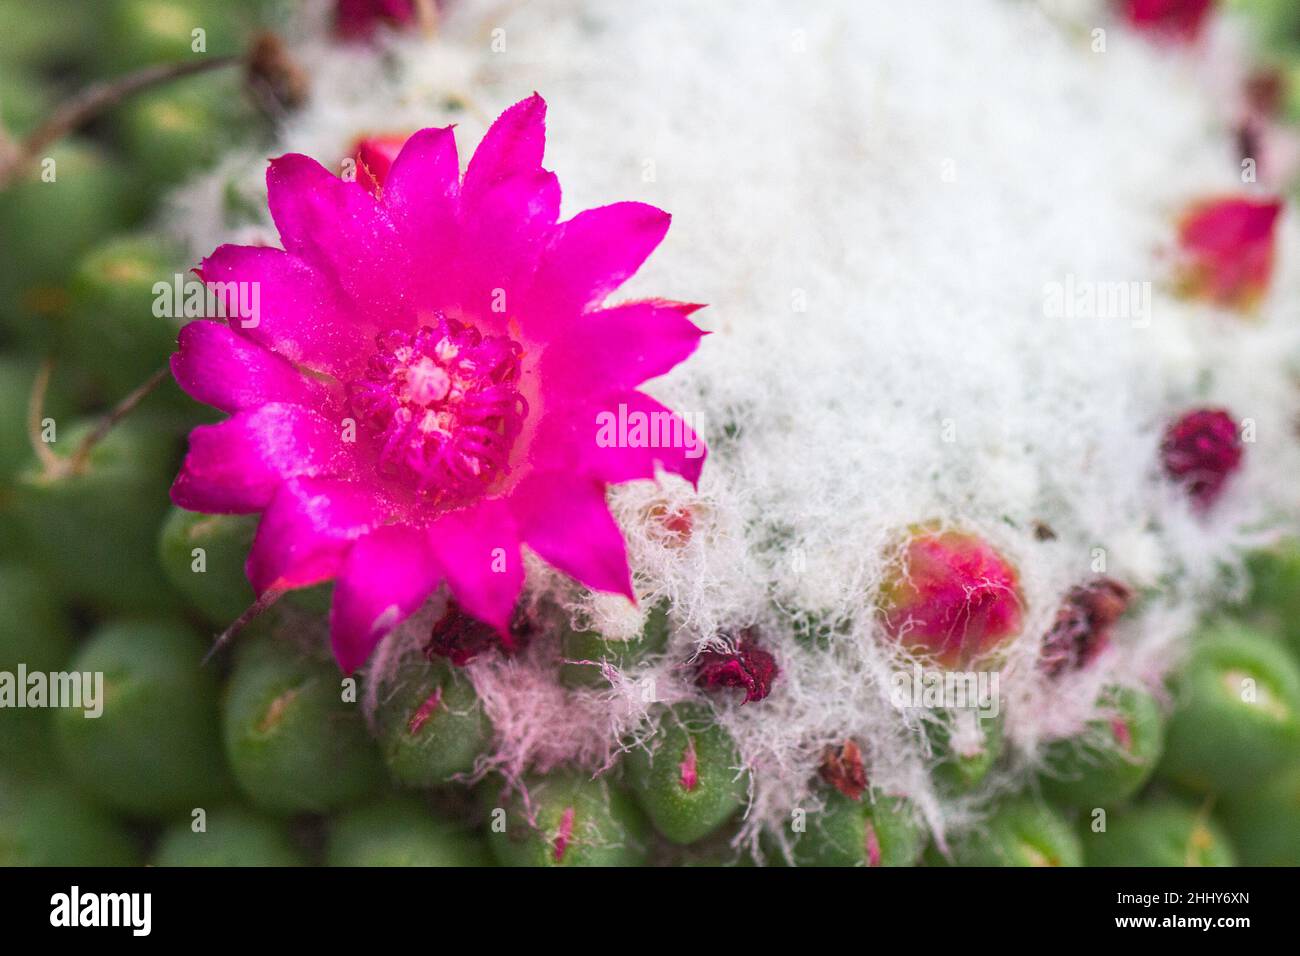 Blooming prickly cactus in close-up view. Stock Photo